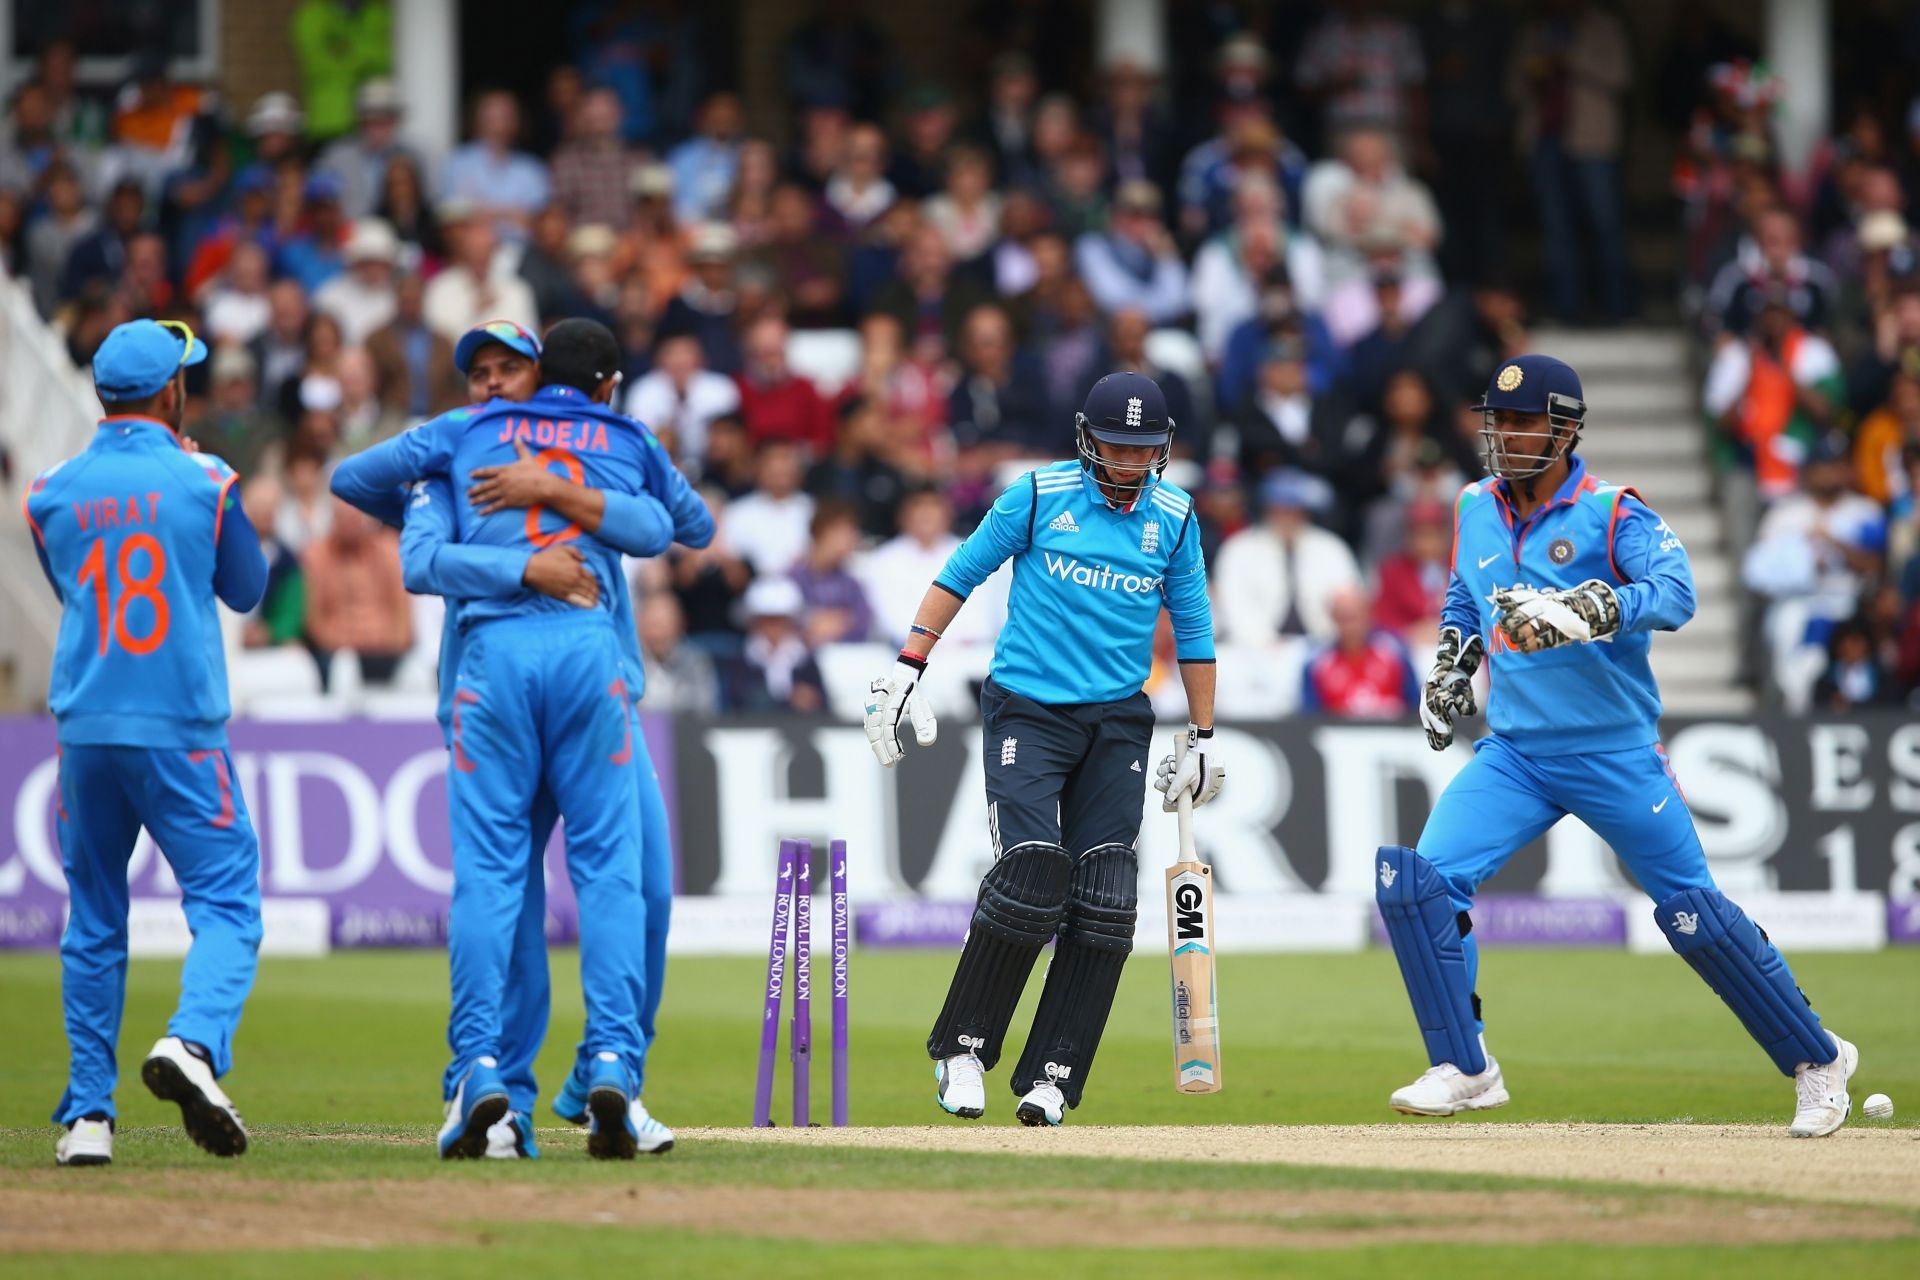 England vs India - Royal London One-Day Series 2014